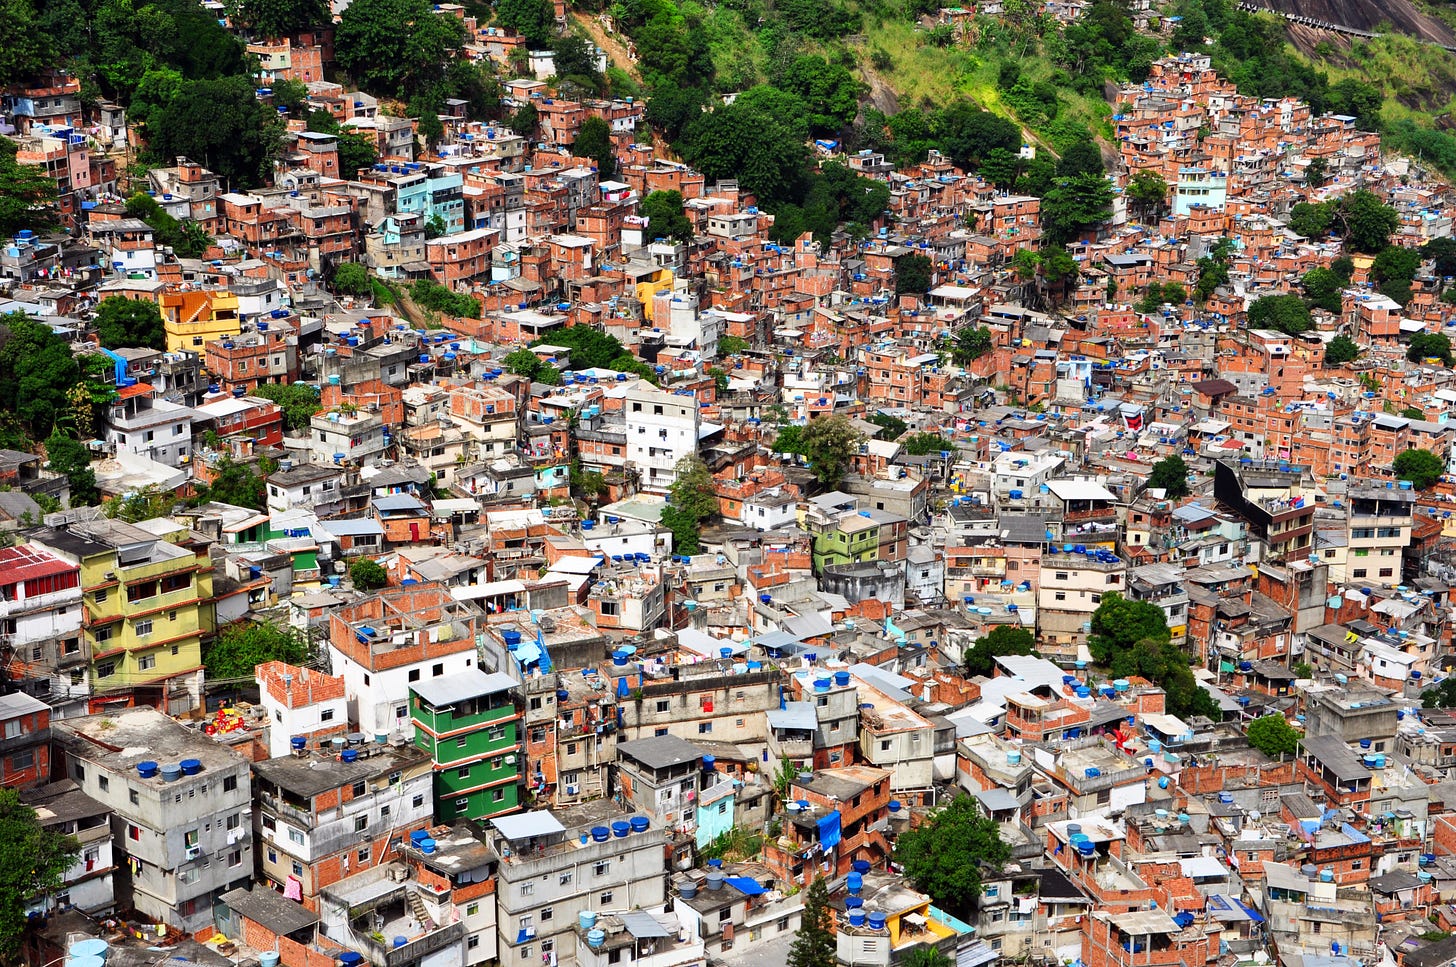 Hundreds of homes on a Rio de Janeiro hillside jammed together, slums of the working class